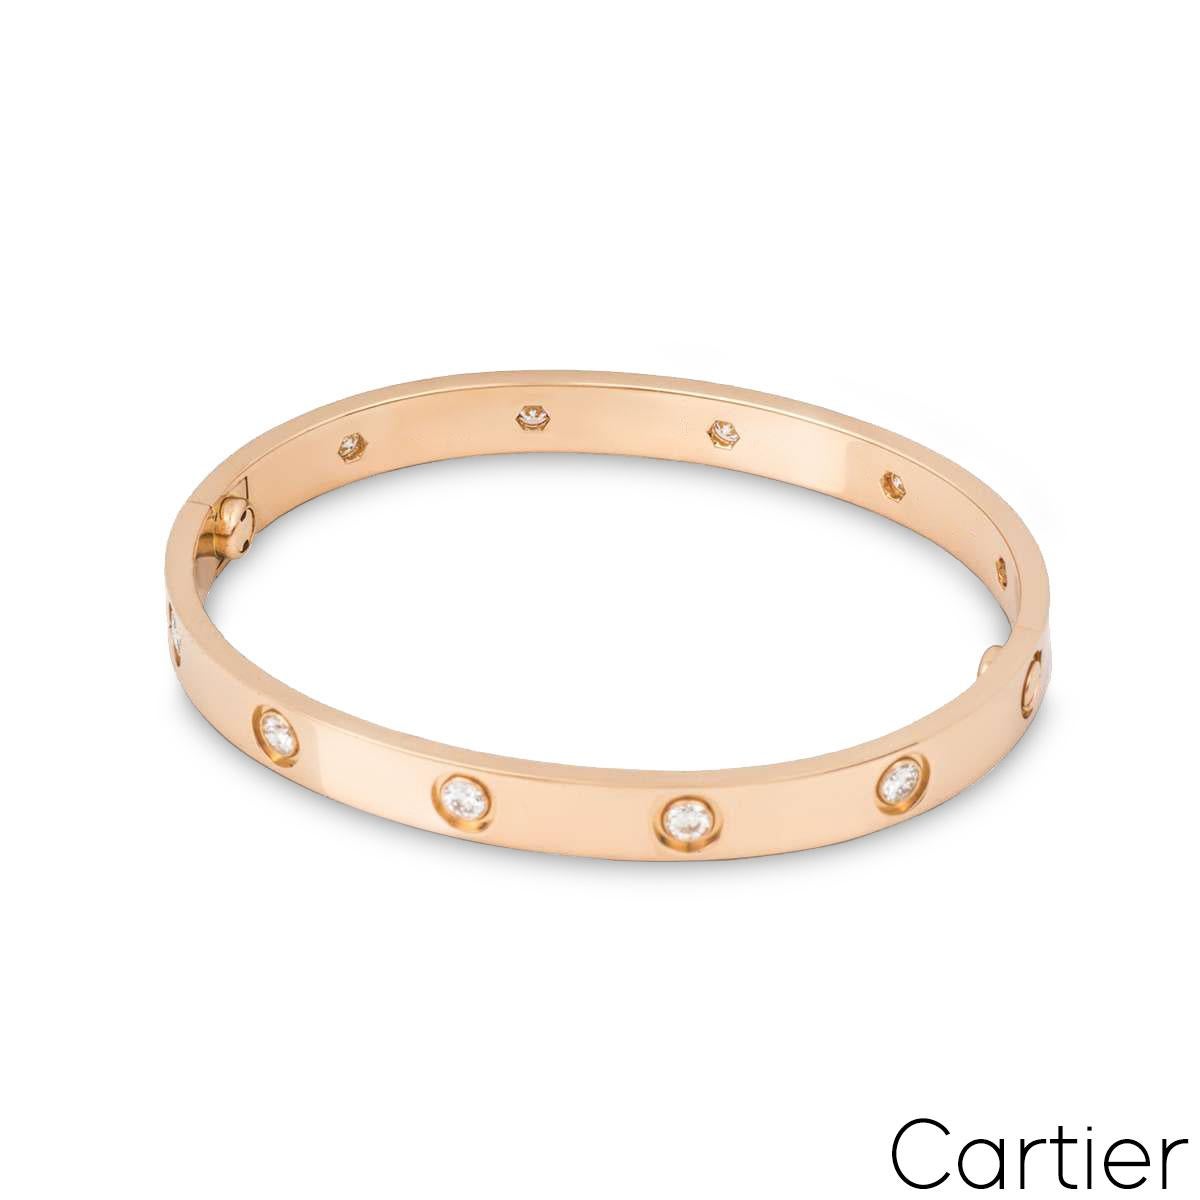 An iconic 18k rose gold full diamond Love bracelet by Cartier. The bracelet is set with 10 round brilliant cut diamonds circulating the outer edge throughout totalling 0.96ct. The bracelet is a size 19 and features the new style screw fitting and